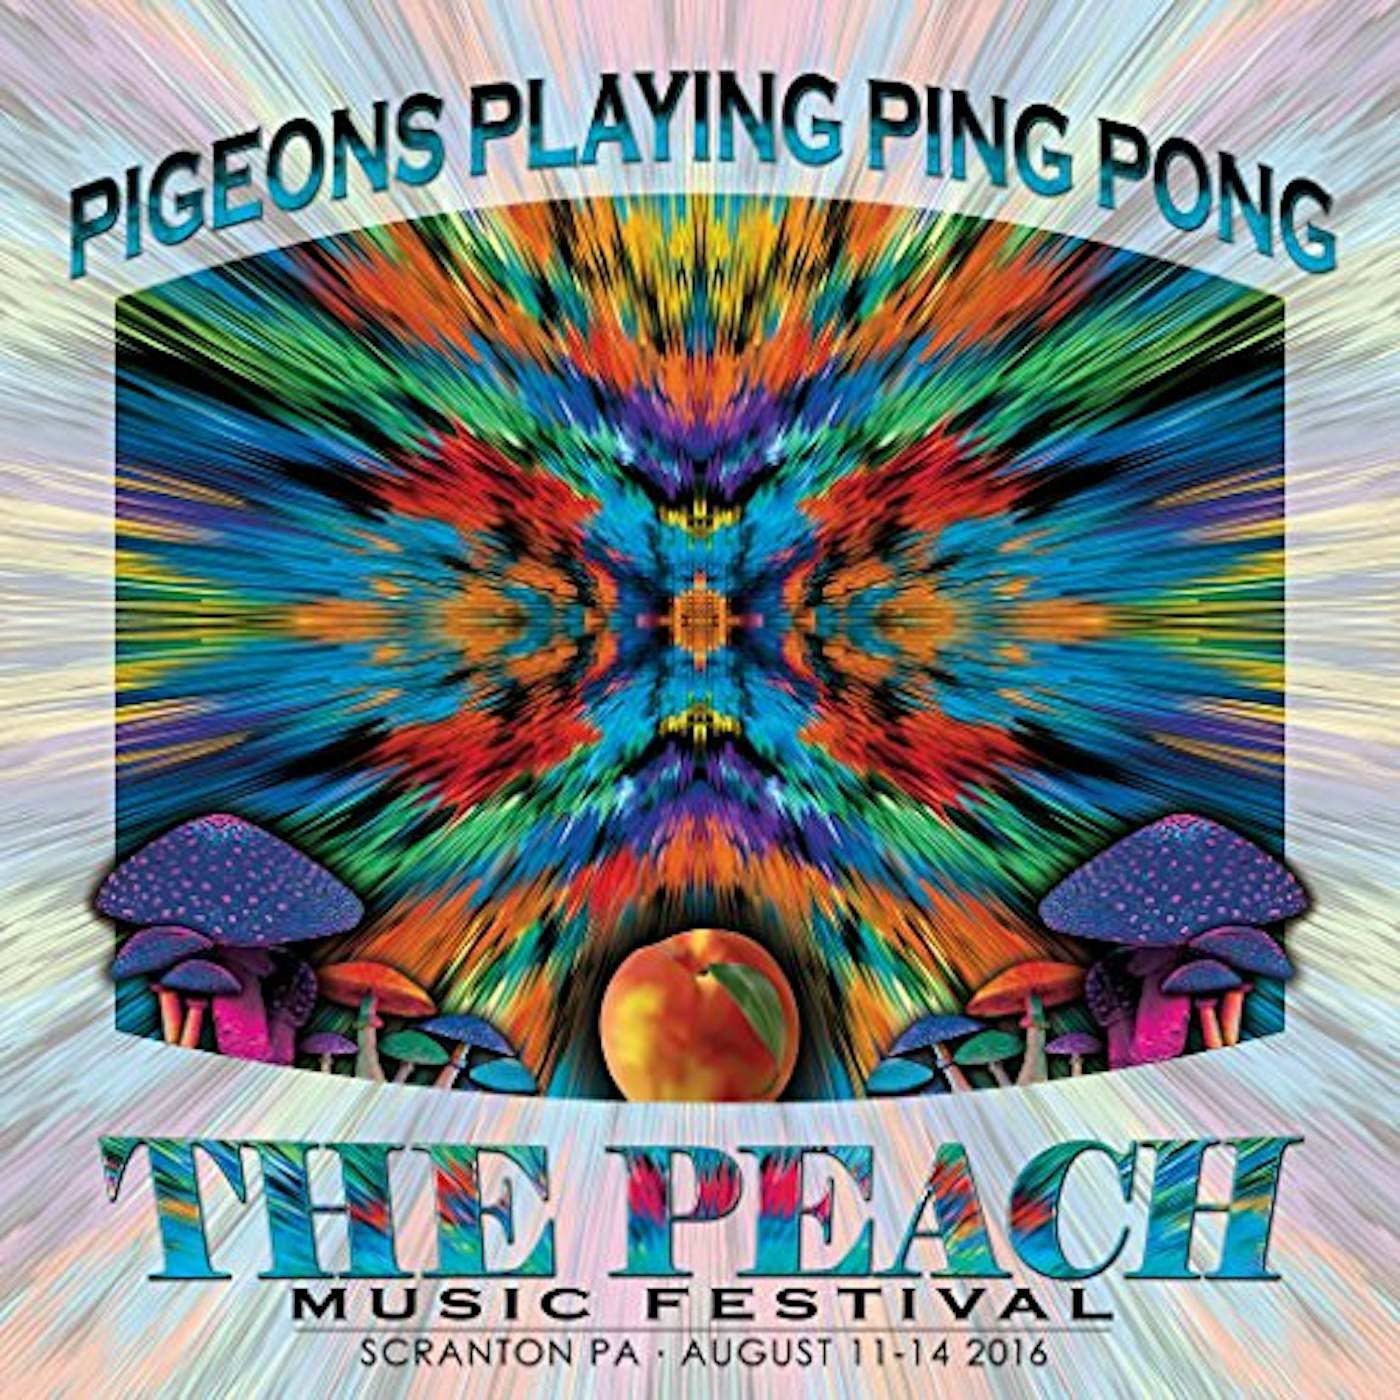 Pigeons Playing Ping Pong PEACH MUSIC FESTIVAL 2016 CD